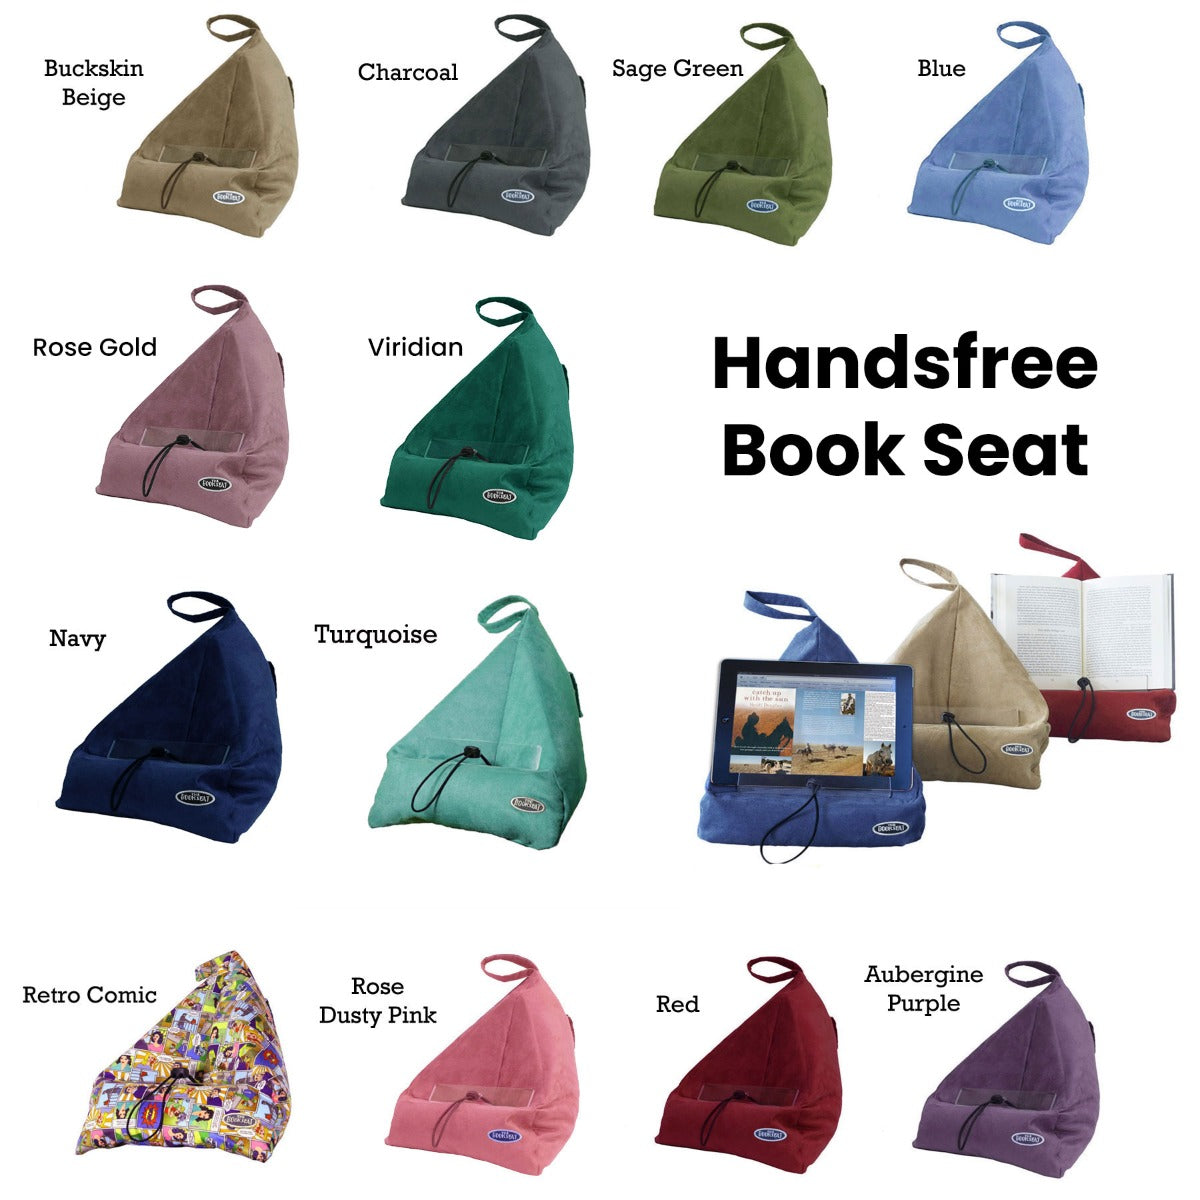 The Book Seat Handsfree Book Seat Charcoal / Grey